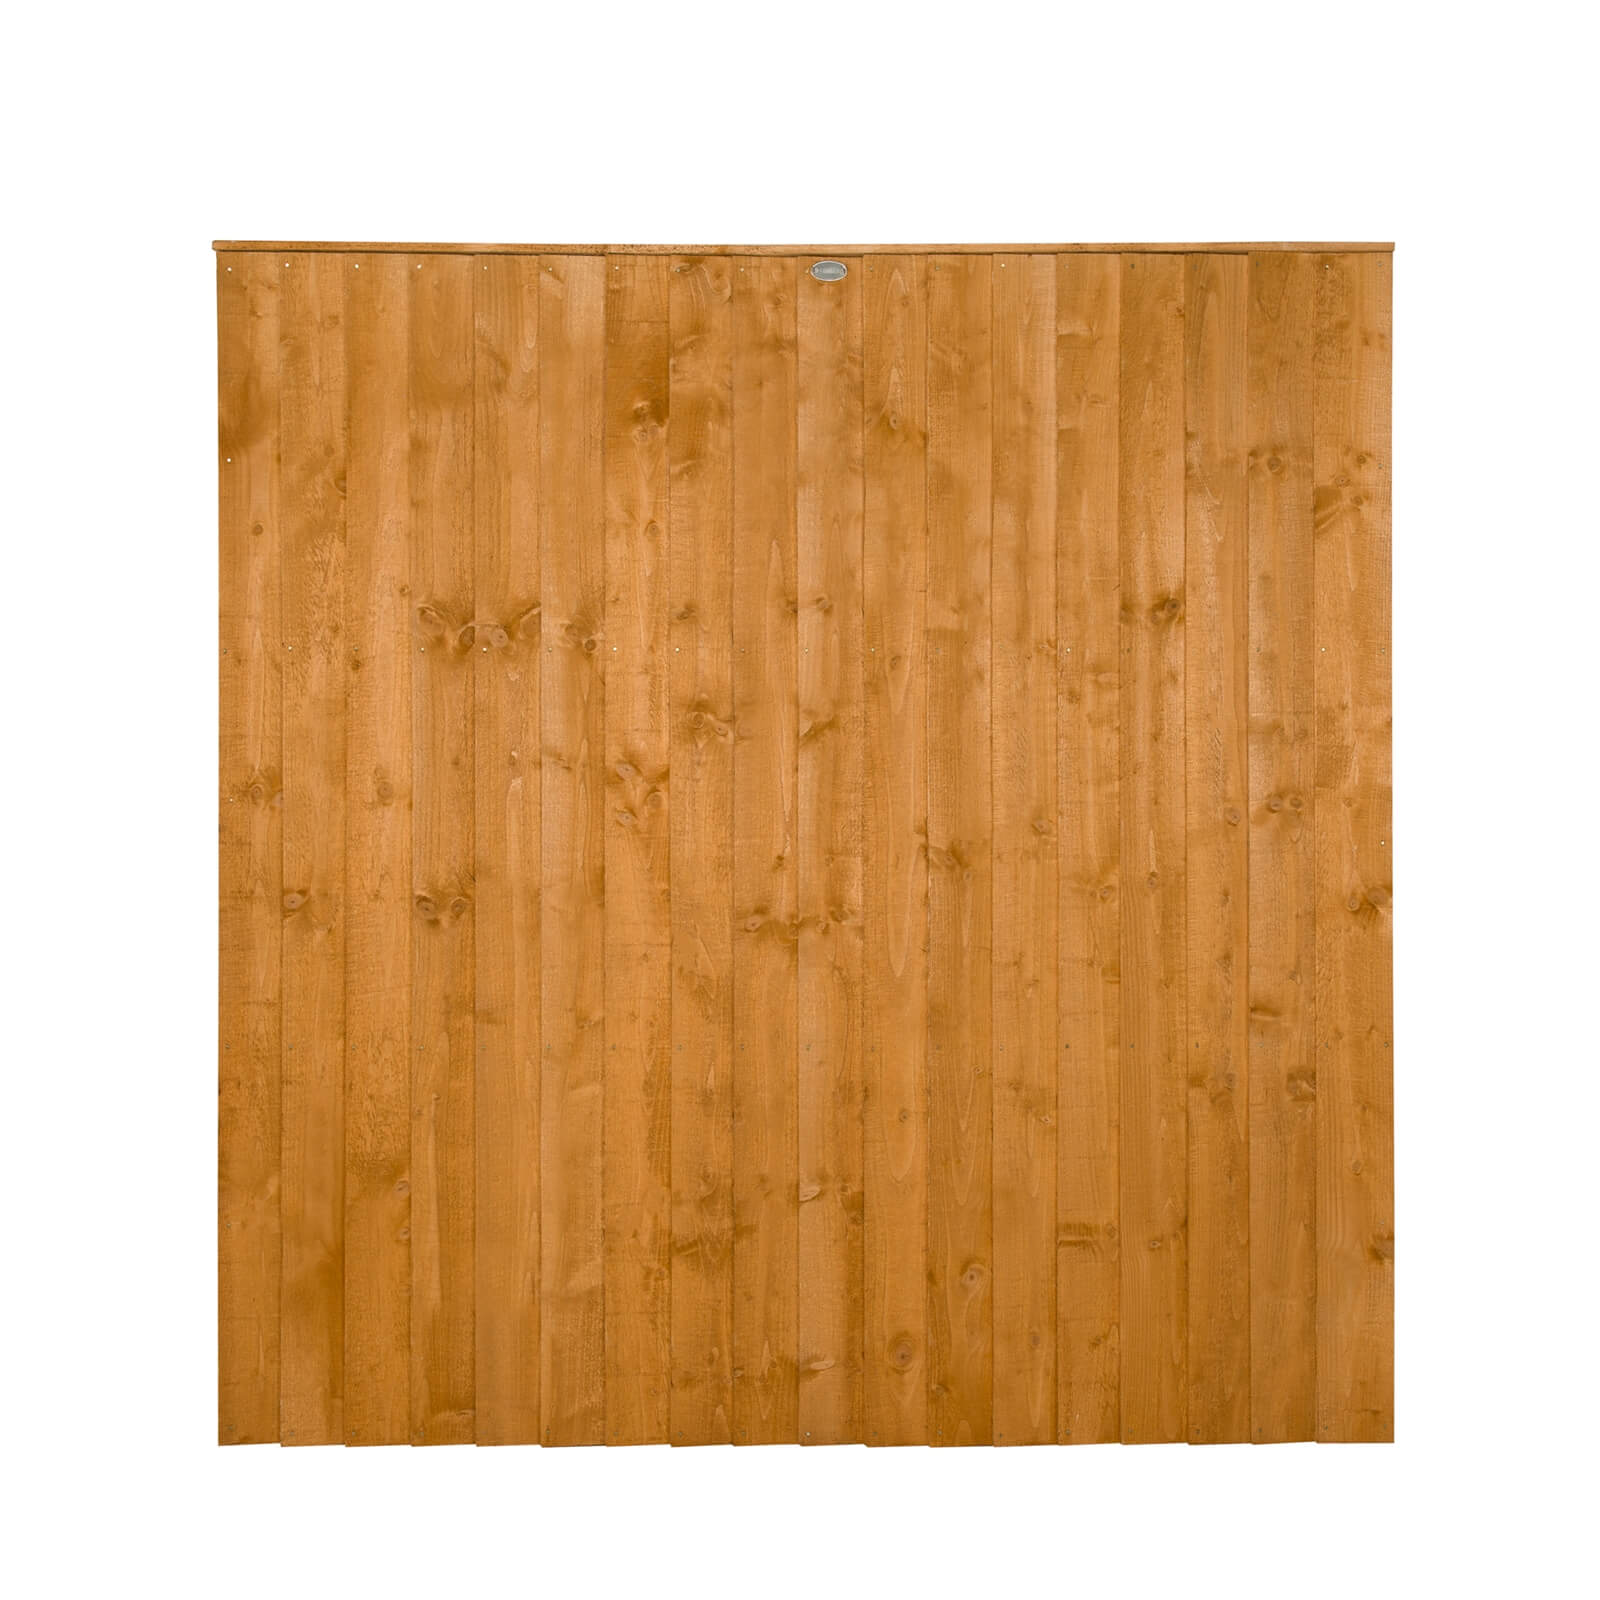 Forest Featherdge Fence Panel - 6ft - Pack of 4